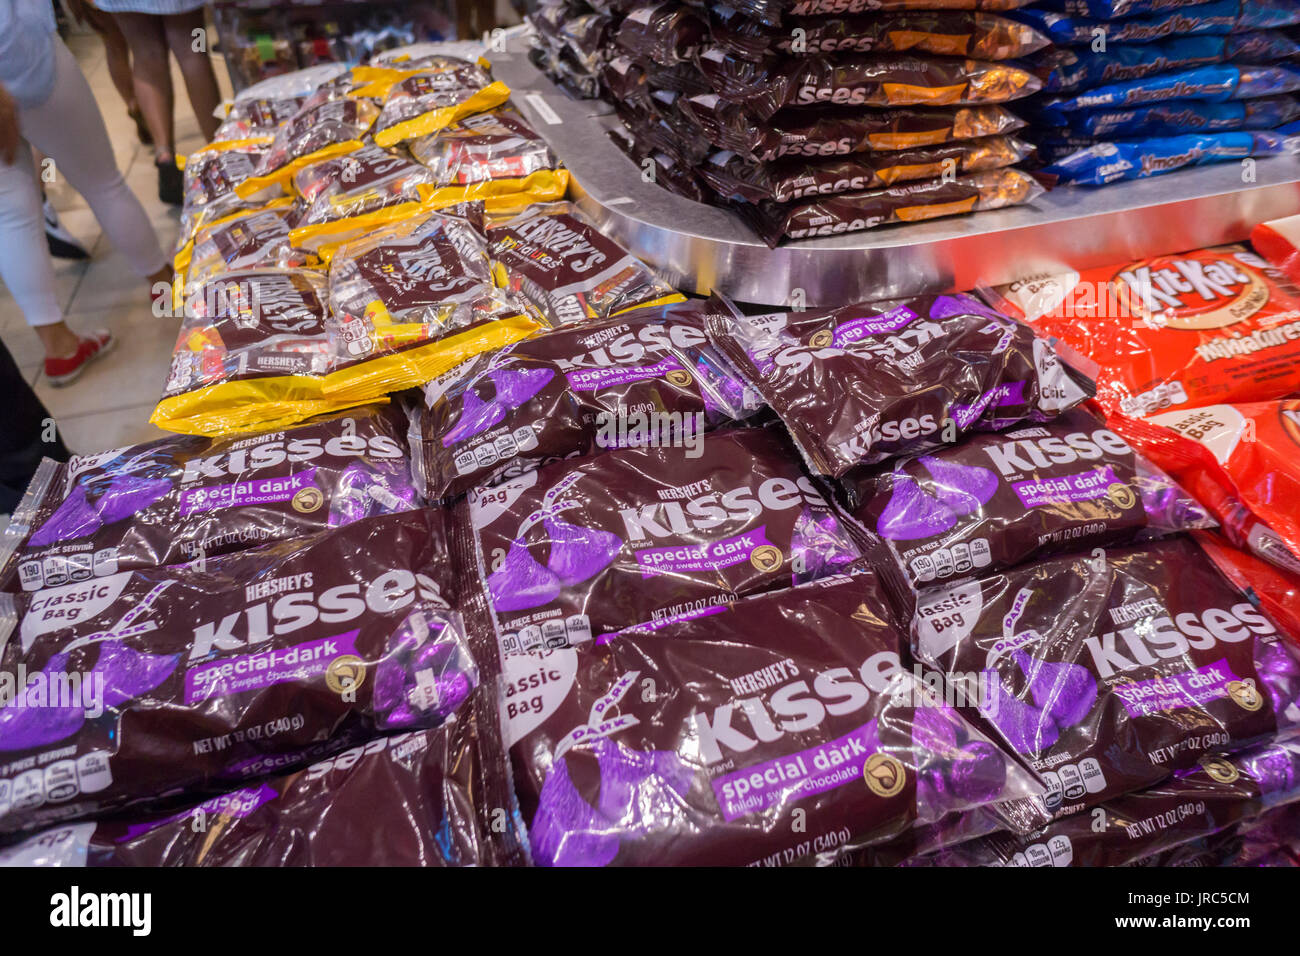 Bags of Kisses in the Hershey Store in Times Square in New York on Thursday, July 27, 2017. The Hershey Co. recently reported second-quarter profit that beat analysts' expectations. Cost-cutting and the reinvention of products are cited. (© Richard B. Levine) Stock Photo